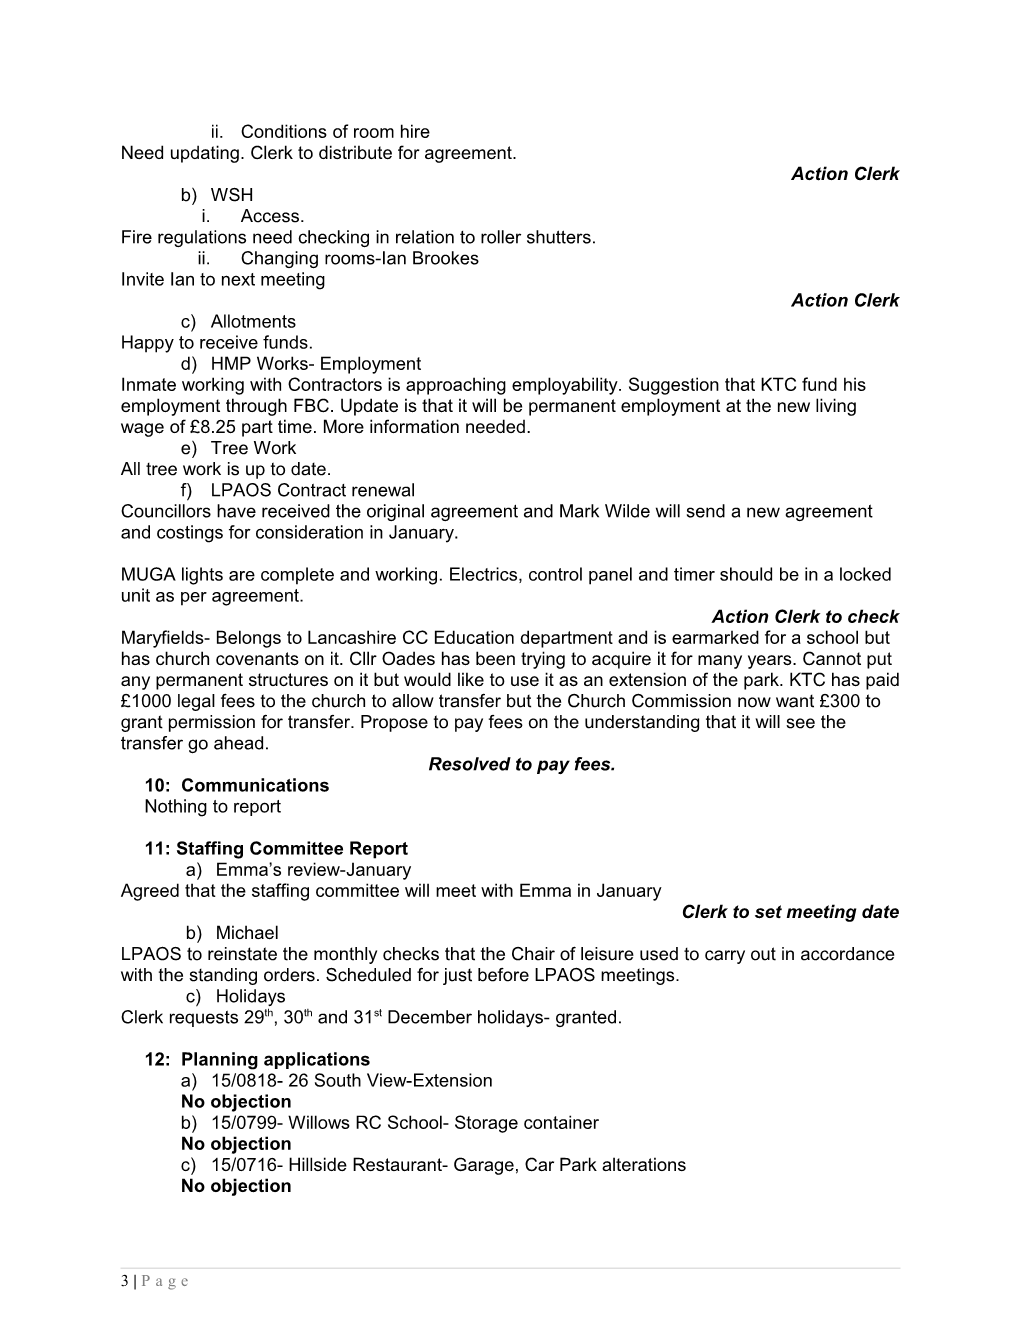 Minutes of Meeting of Kirkham Town Council Held on 1Stdecember 2015